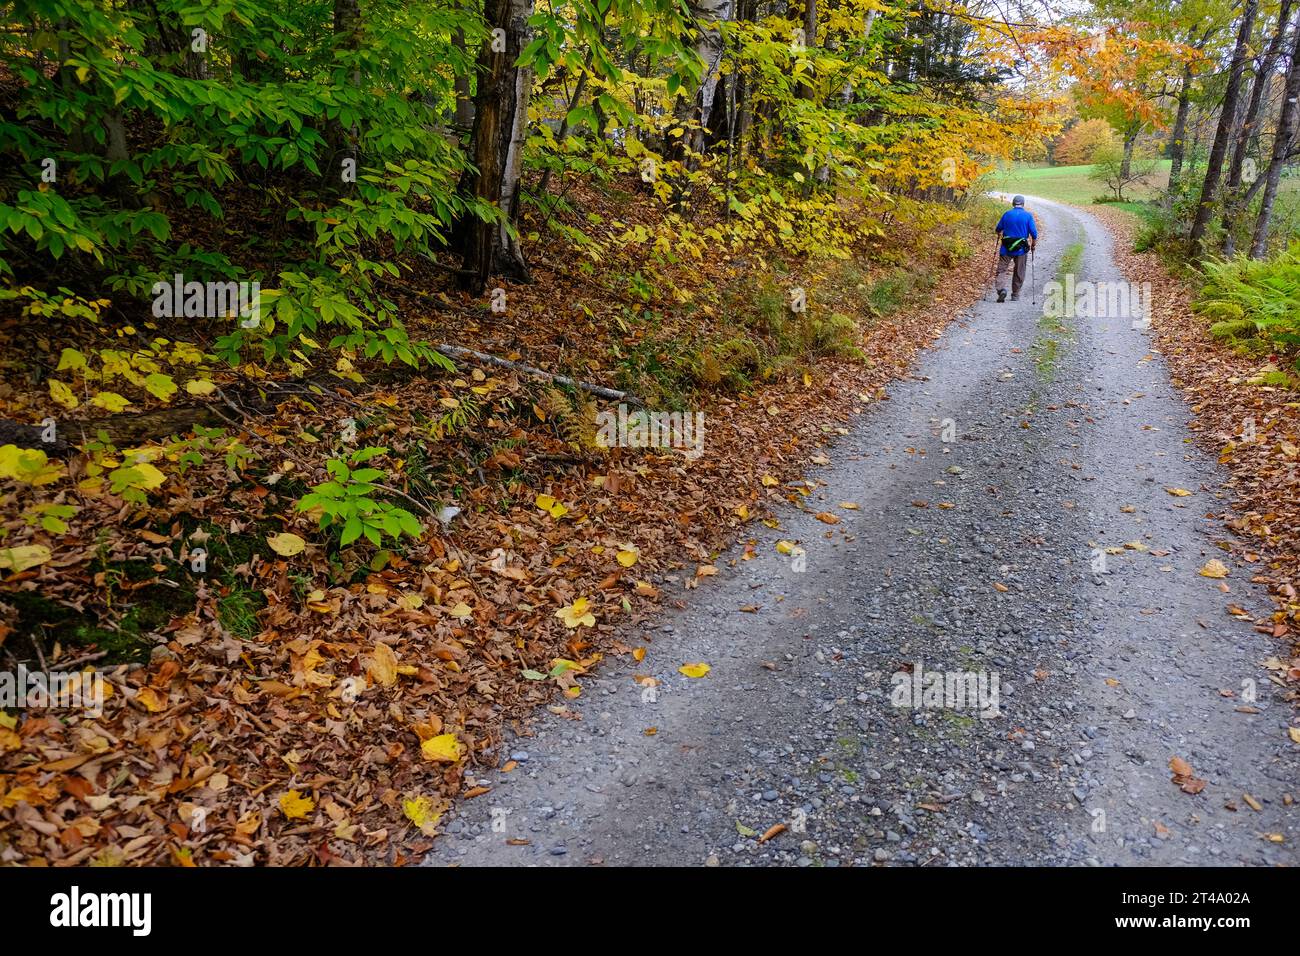 An older person walks along a country road in Vermont near colorful fall foliage using ski poles to walk with. Stock Photo